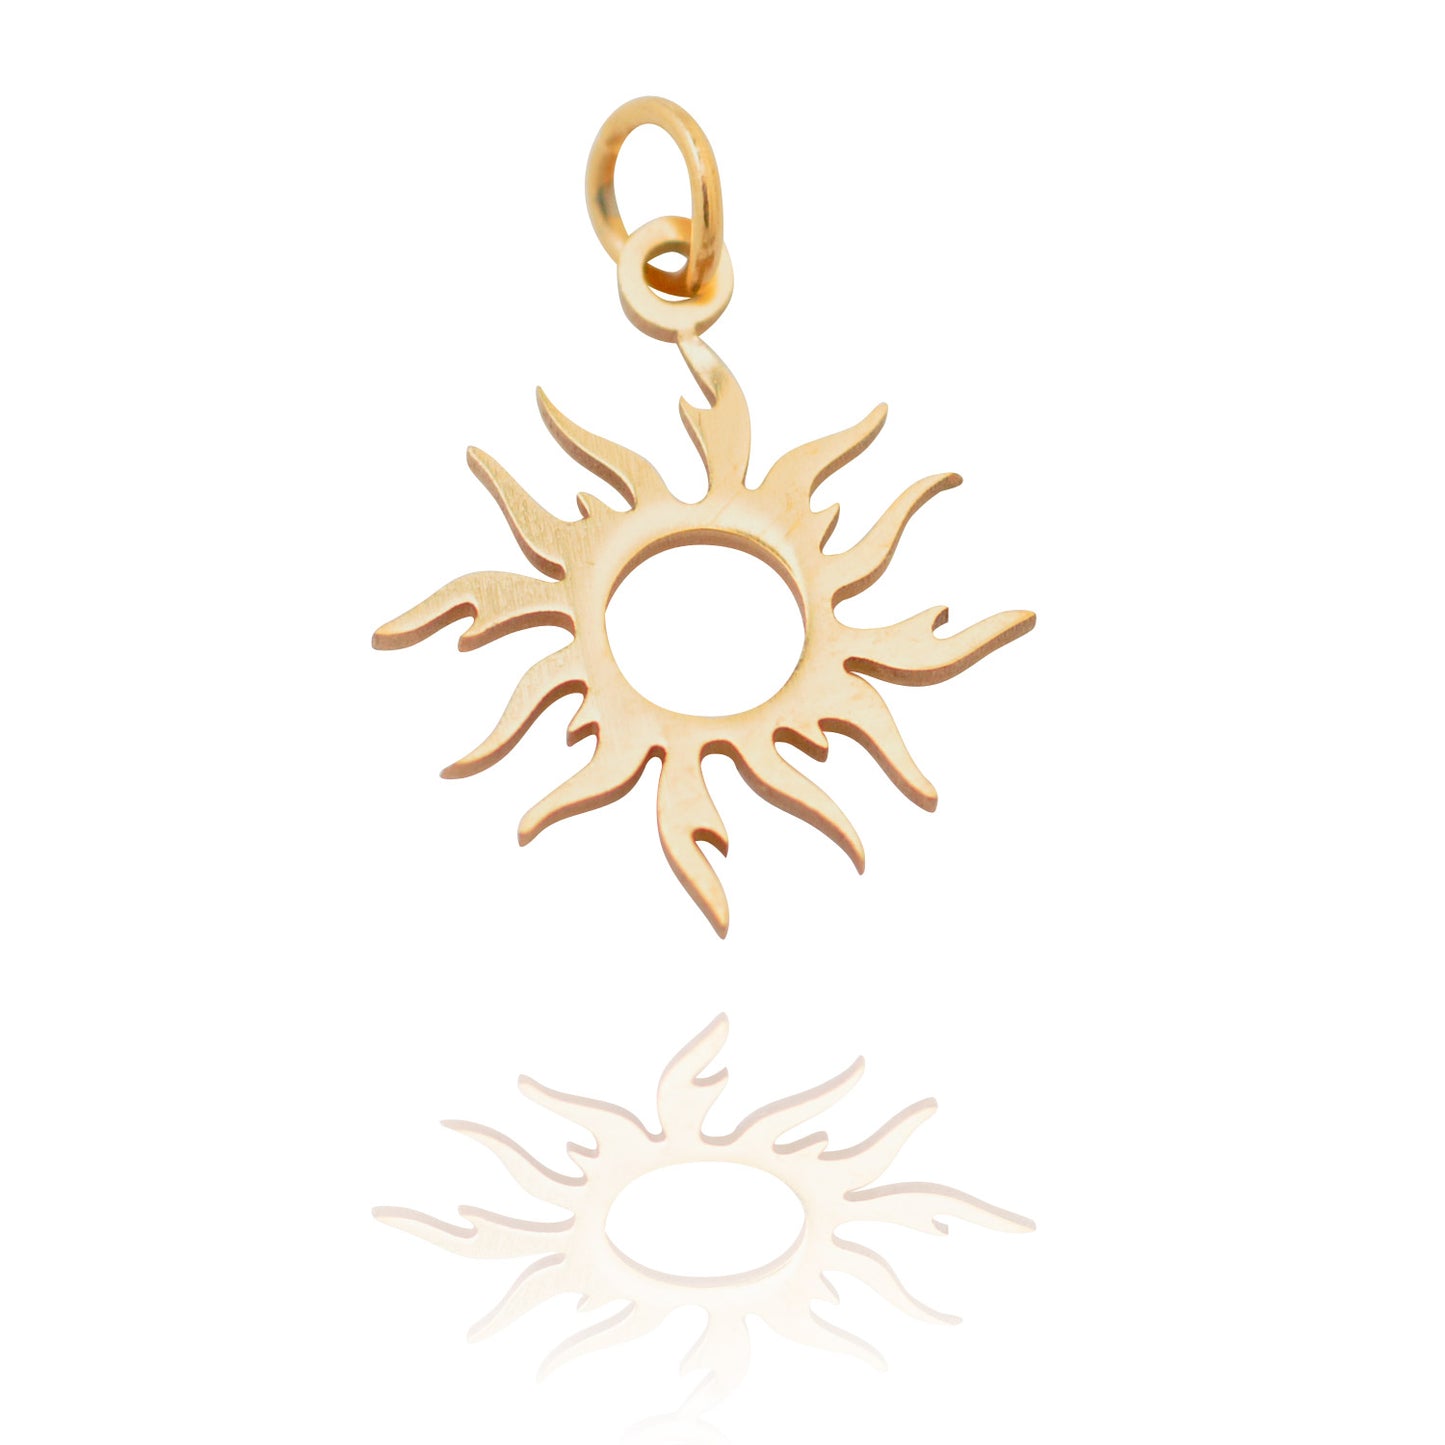 Gold-plated stainless steel pendant / sun / 18 mm